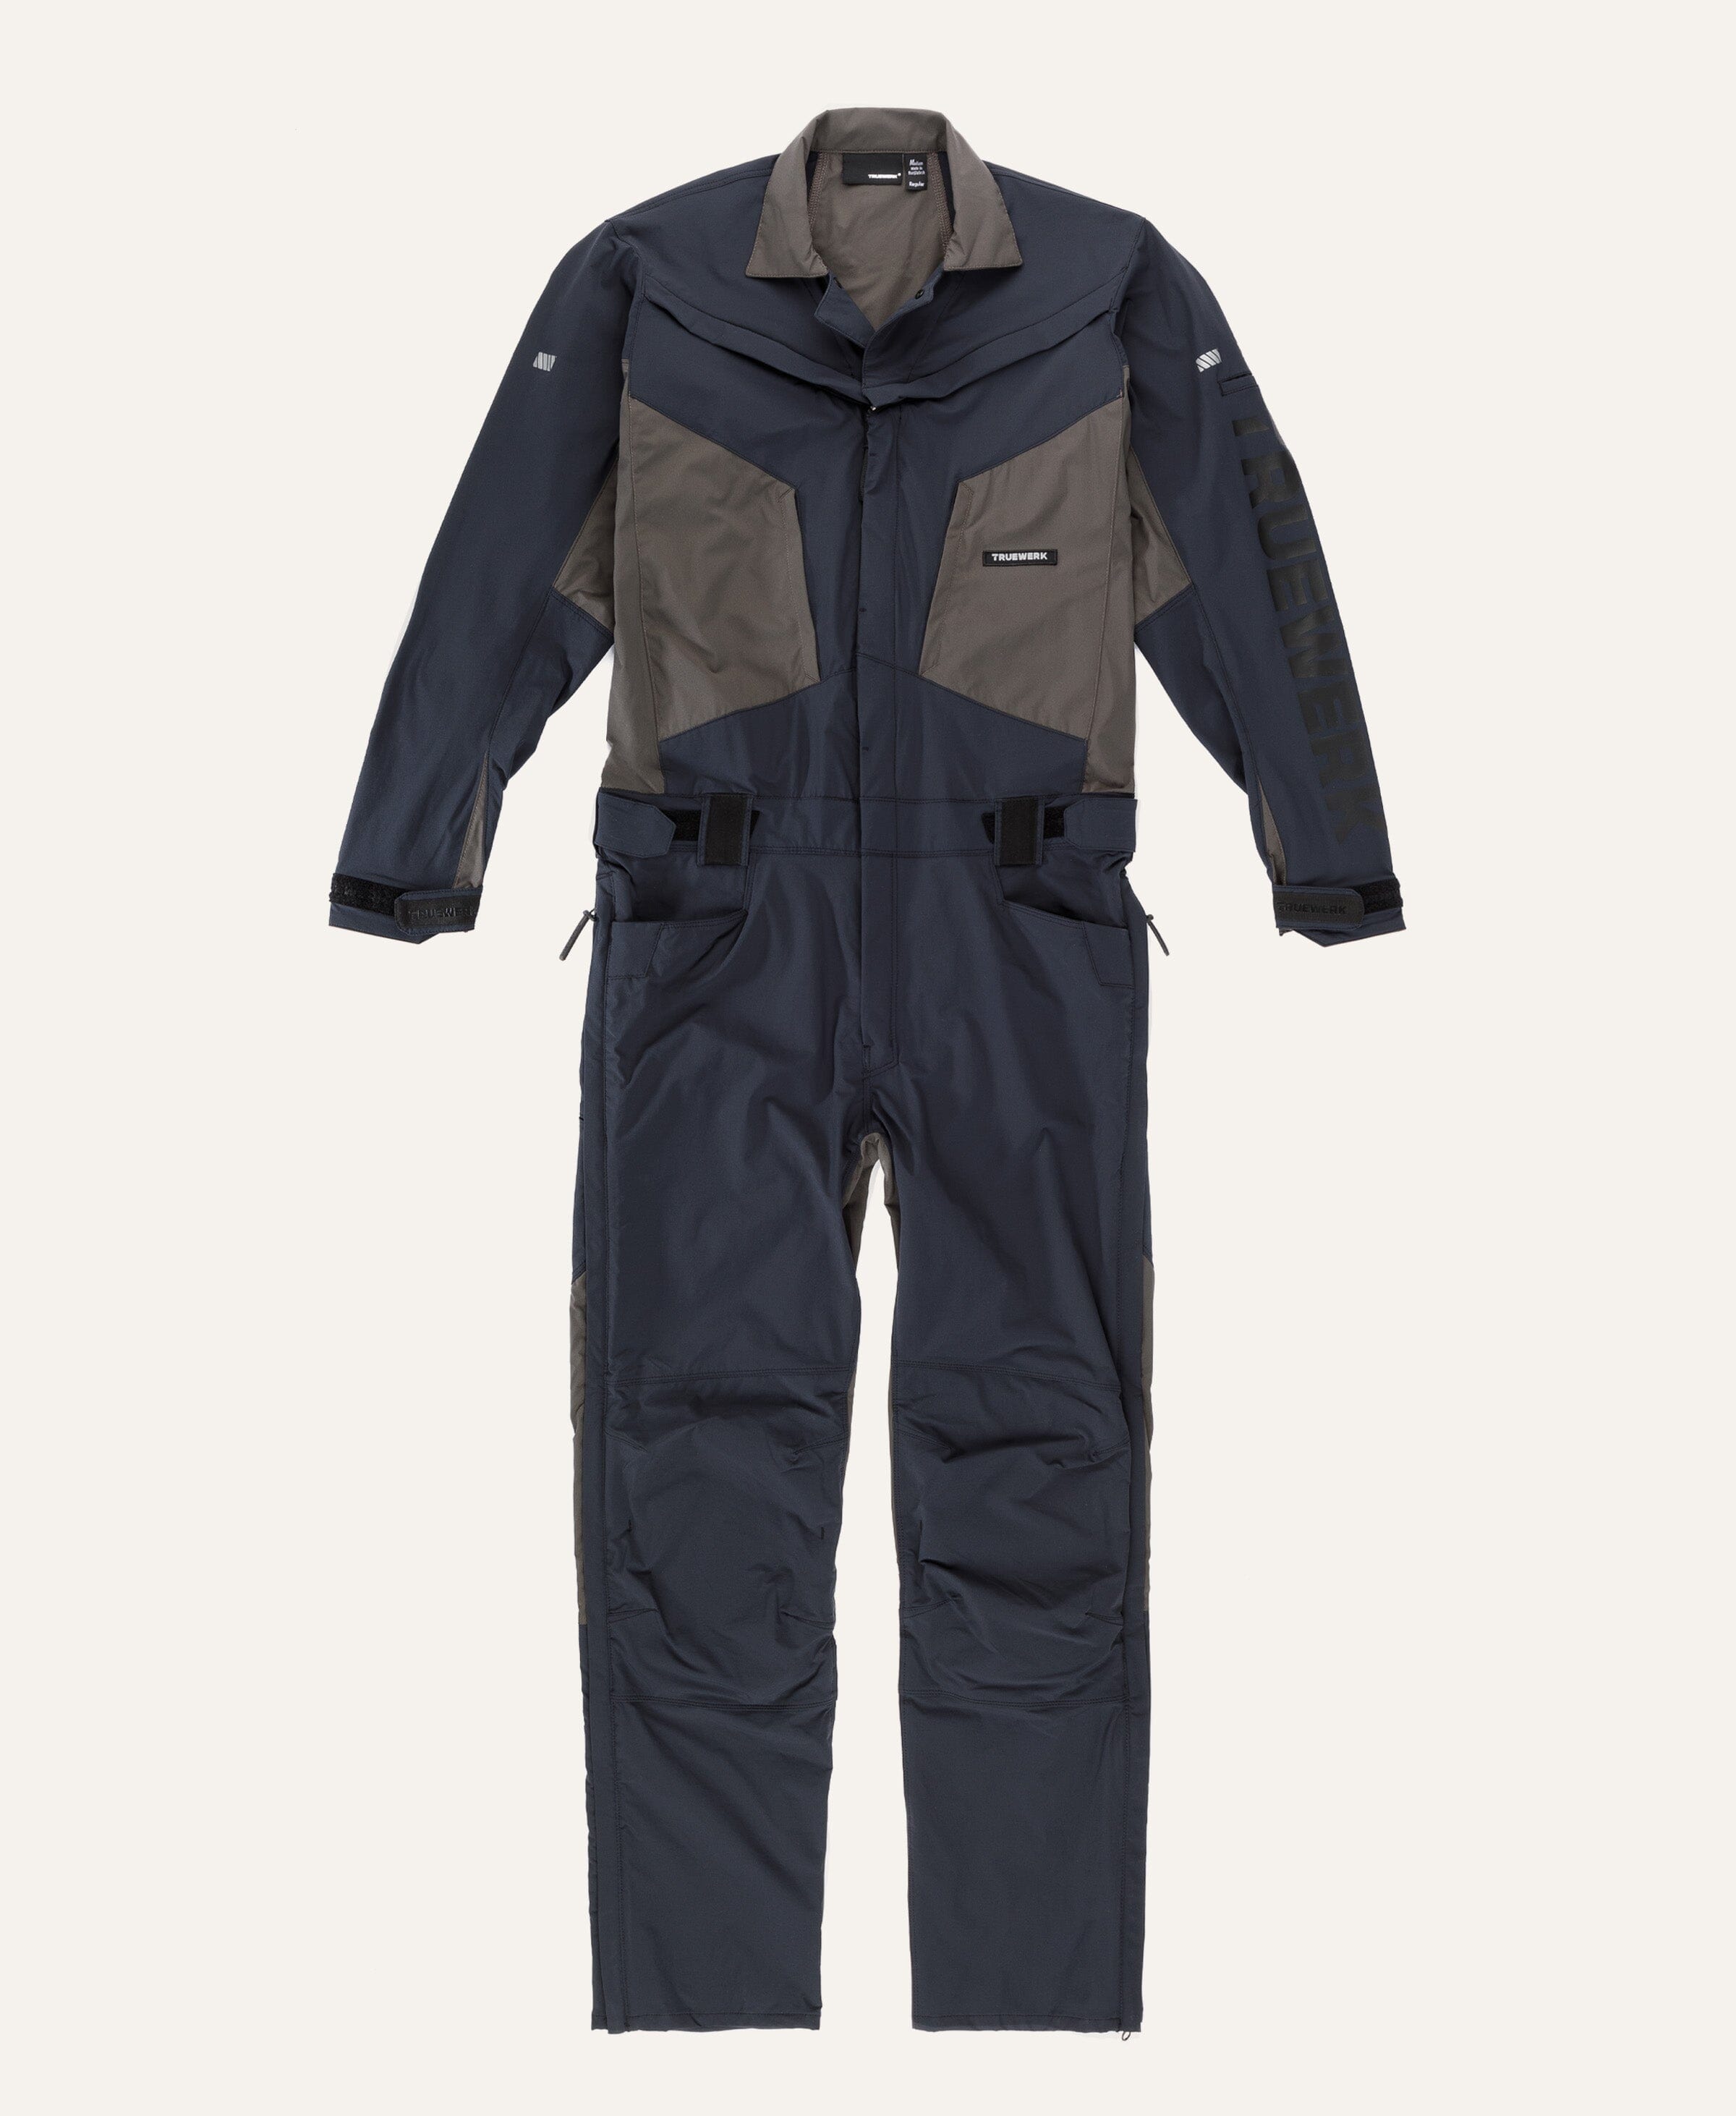 X1 Coverall with Knee Pads Truewerk Navy S Long